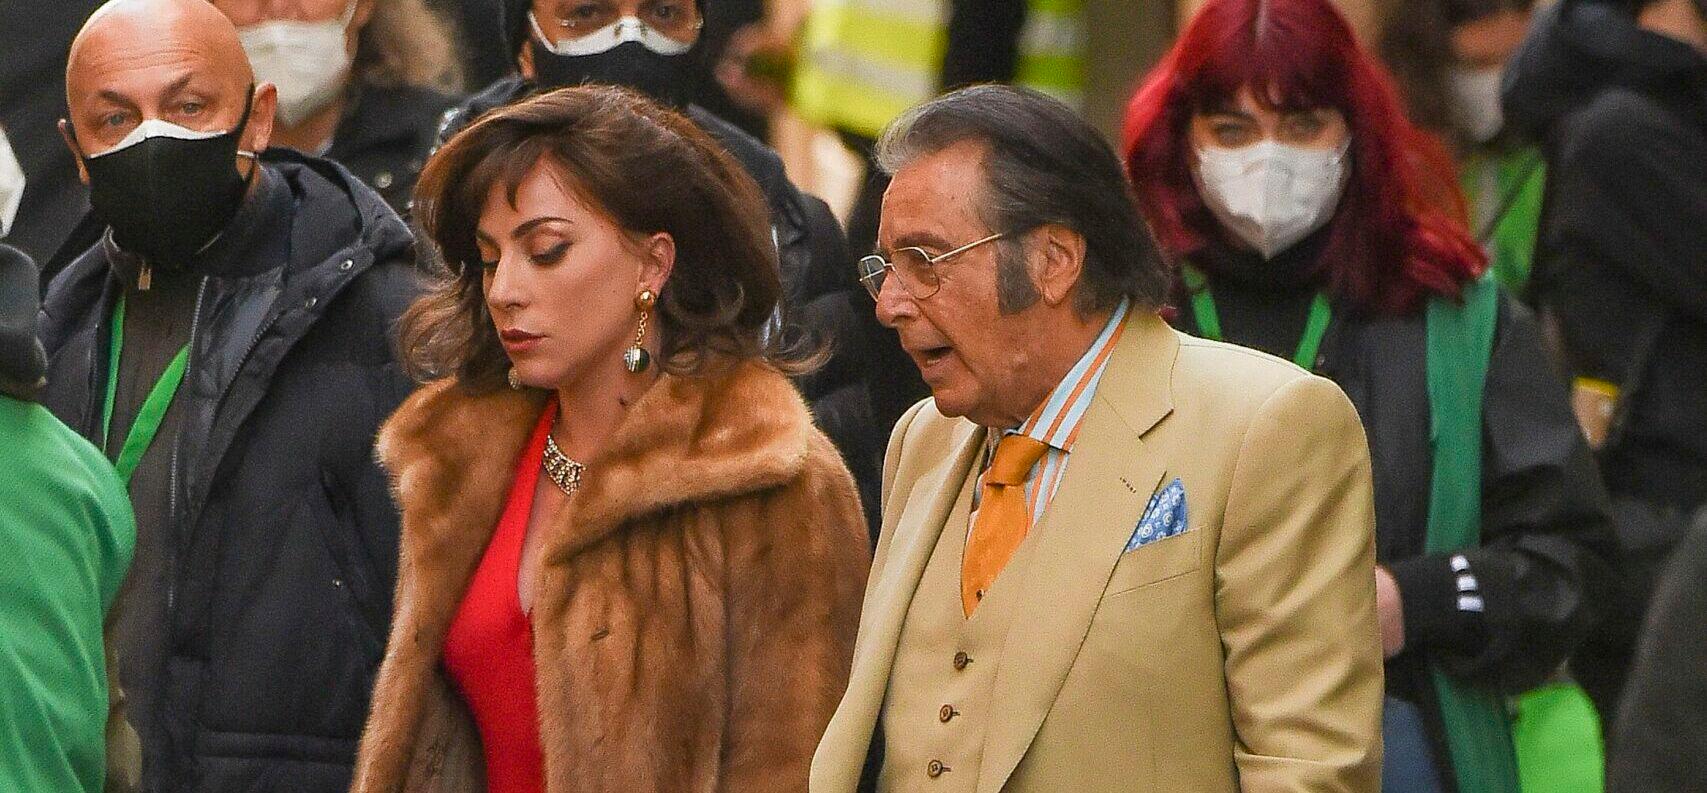 Lady Gaga wearing a fur and Al Pacino filming House of Gucci in Rome, Italy